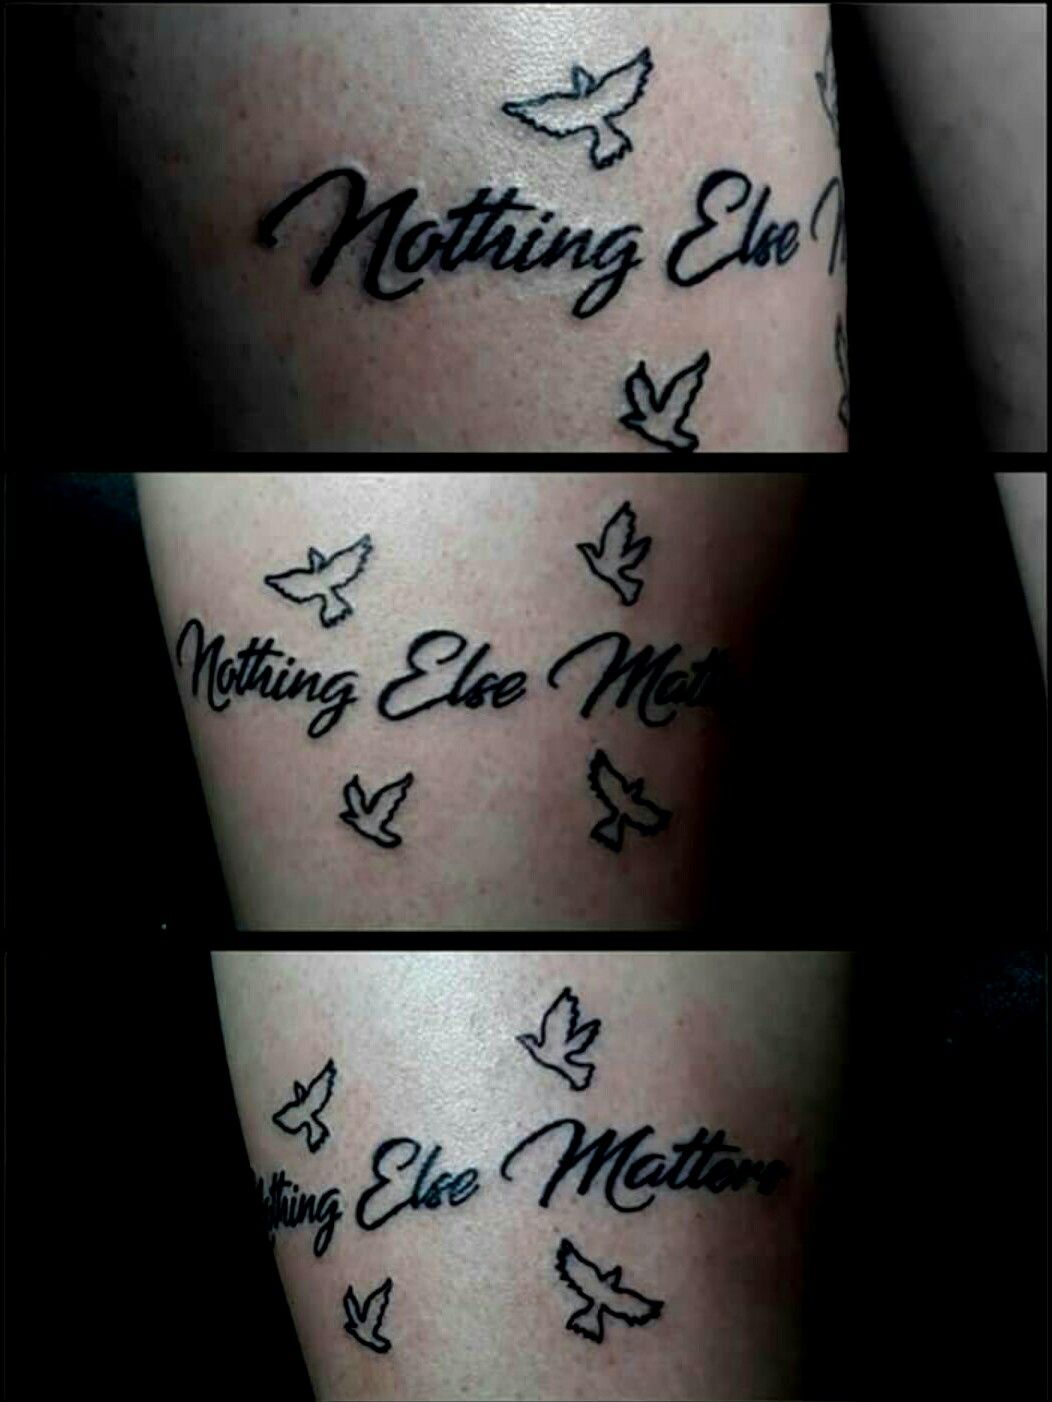 294  365 and nothing else matters metallica tattoo ph  Flickr